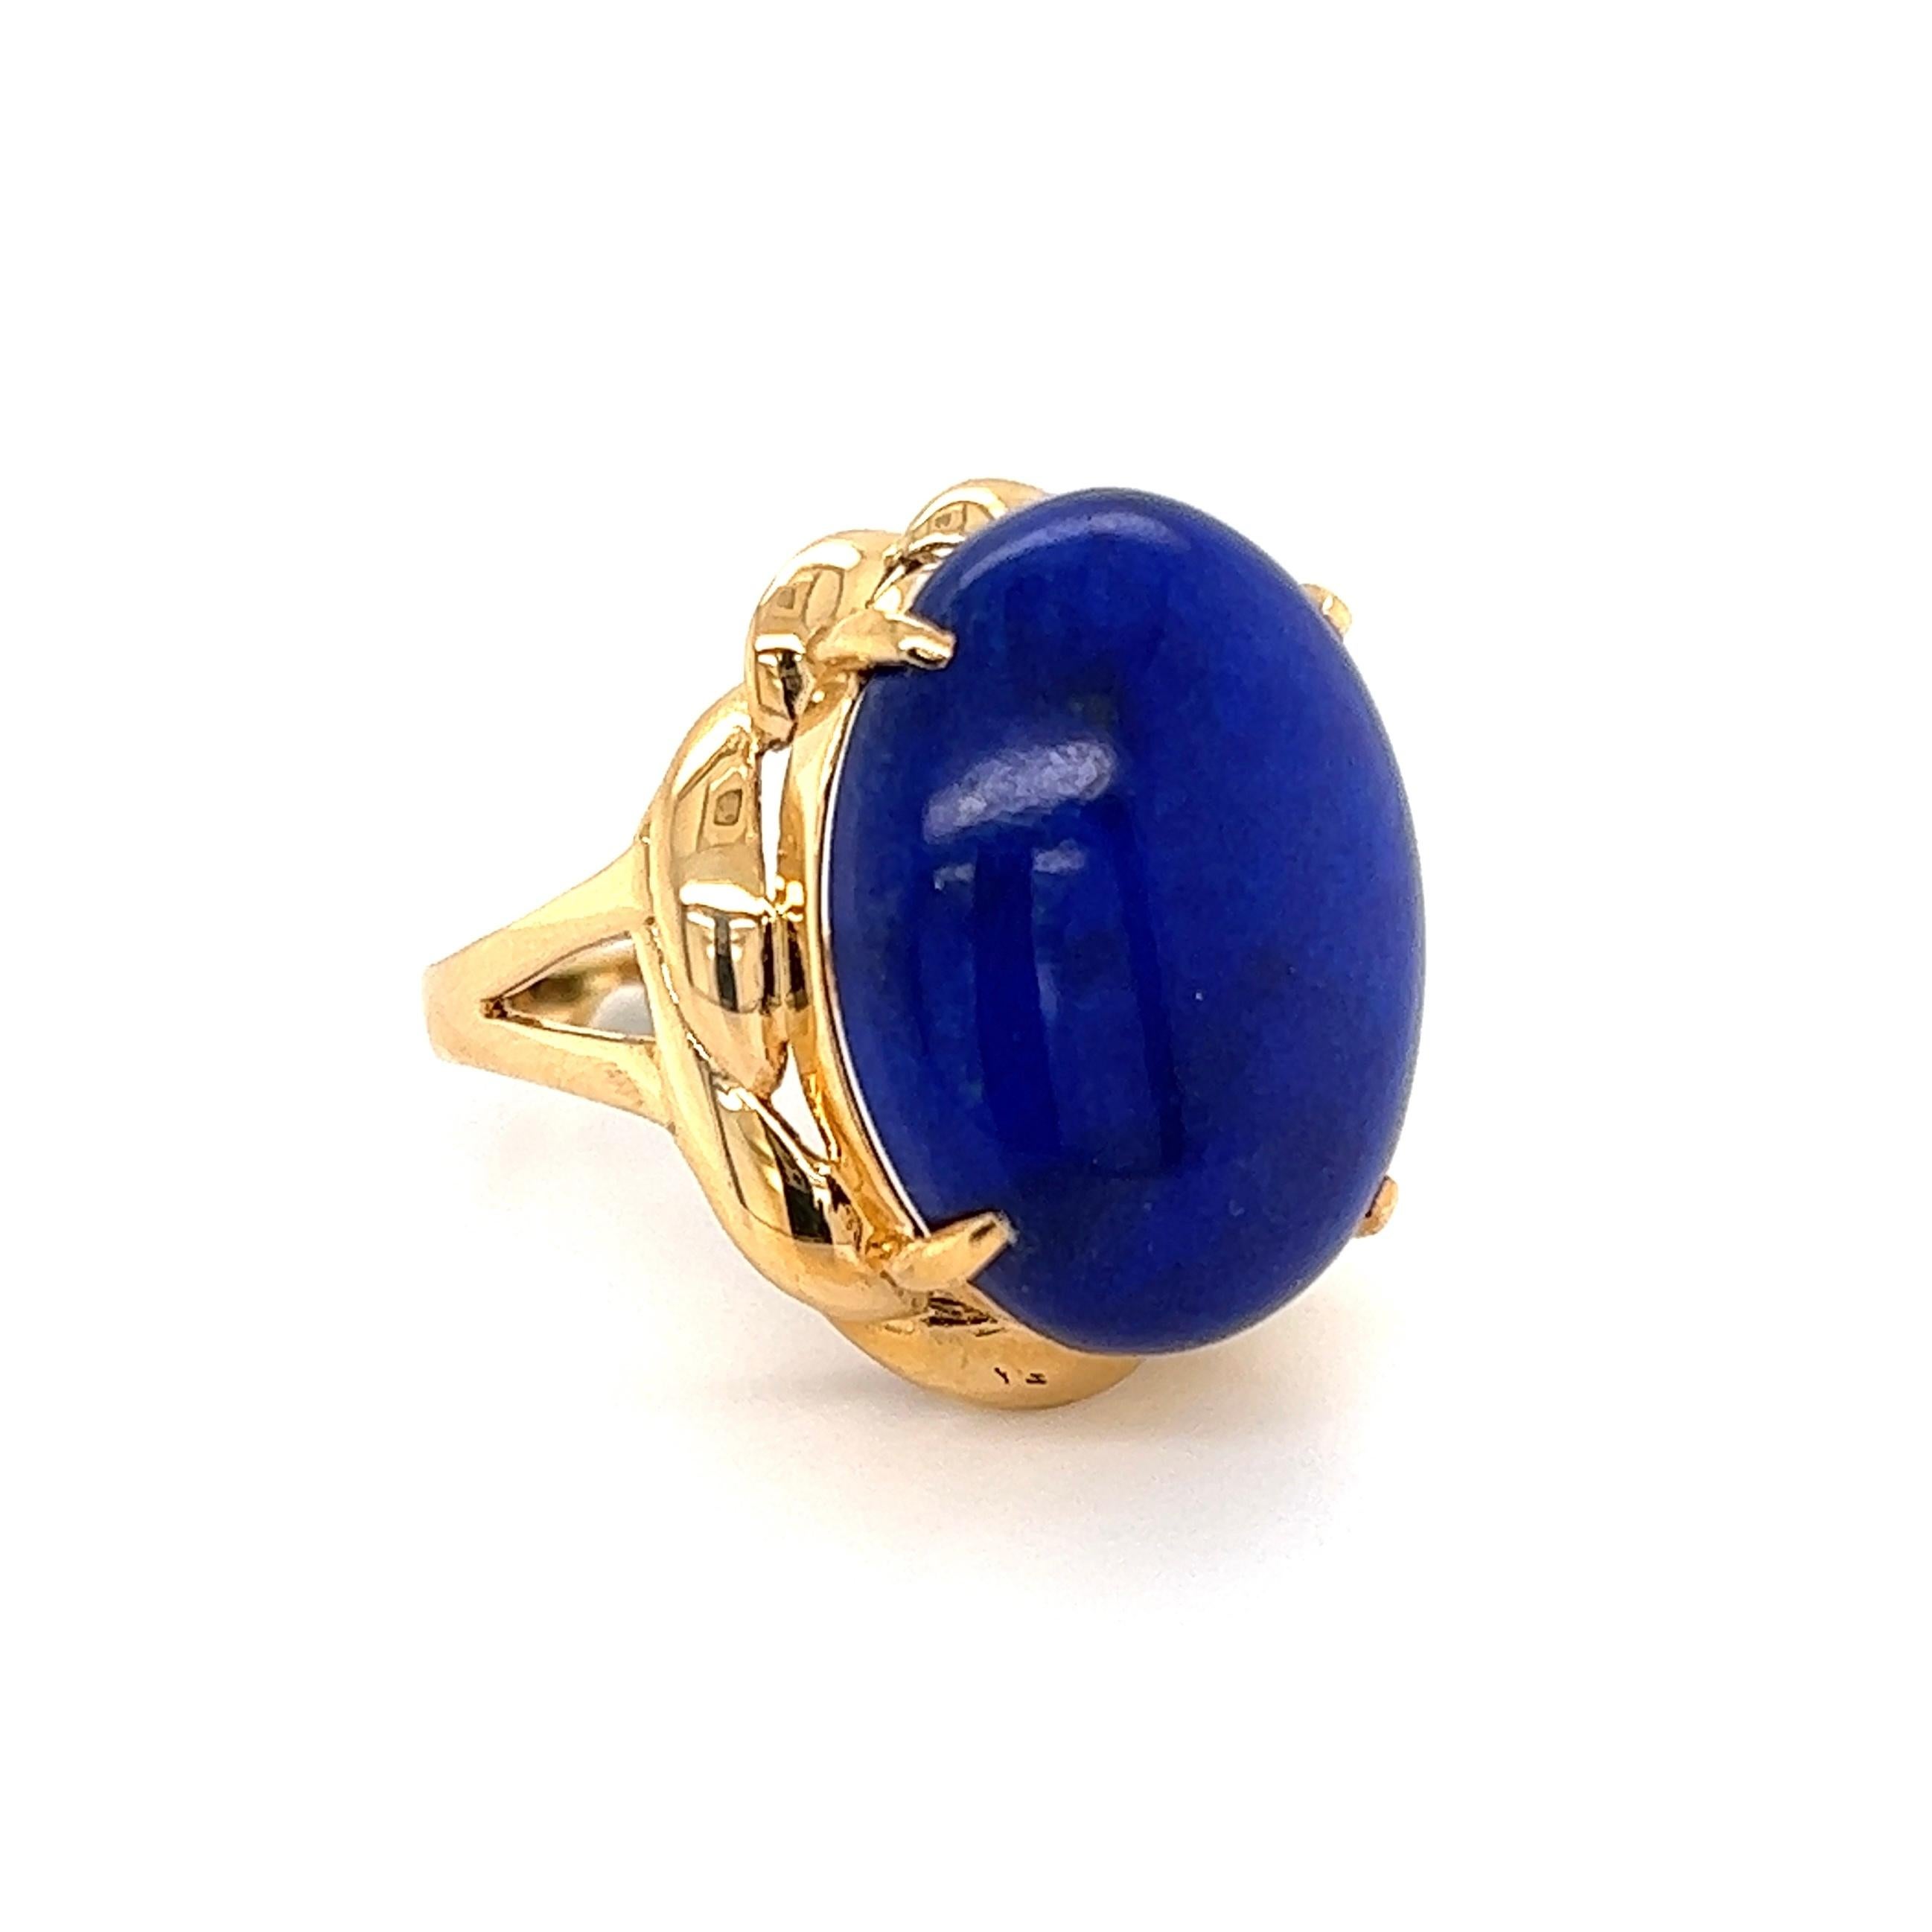 Awesome 8 Carat Lapis Lazuli Gold Cocktail Ring, centering a securely nestled 8 Carat Cabochon Lapis Lazuli. The ring is Hand crafted in 18K Yellow Gold. Measuring approx. 1.13” l x 0.80” w x 0.86” h. Ring Size 6.75, we offer ring re-sizing. Circa